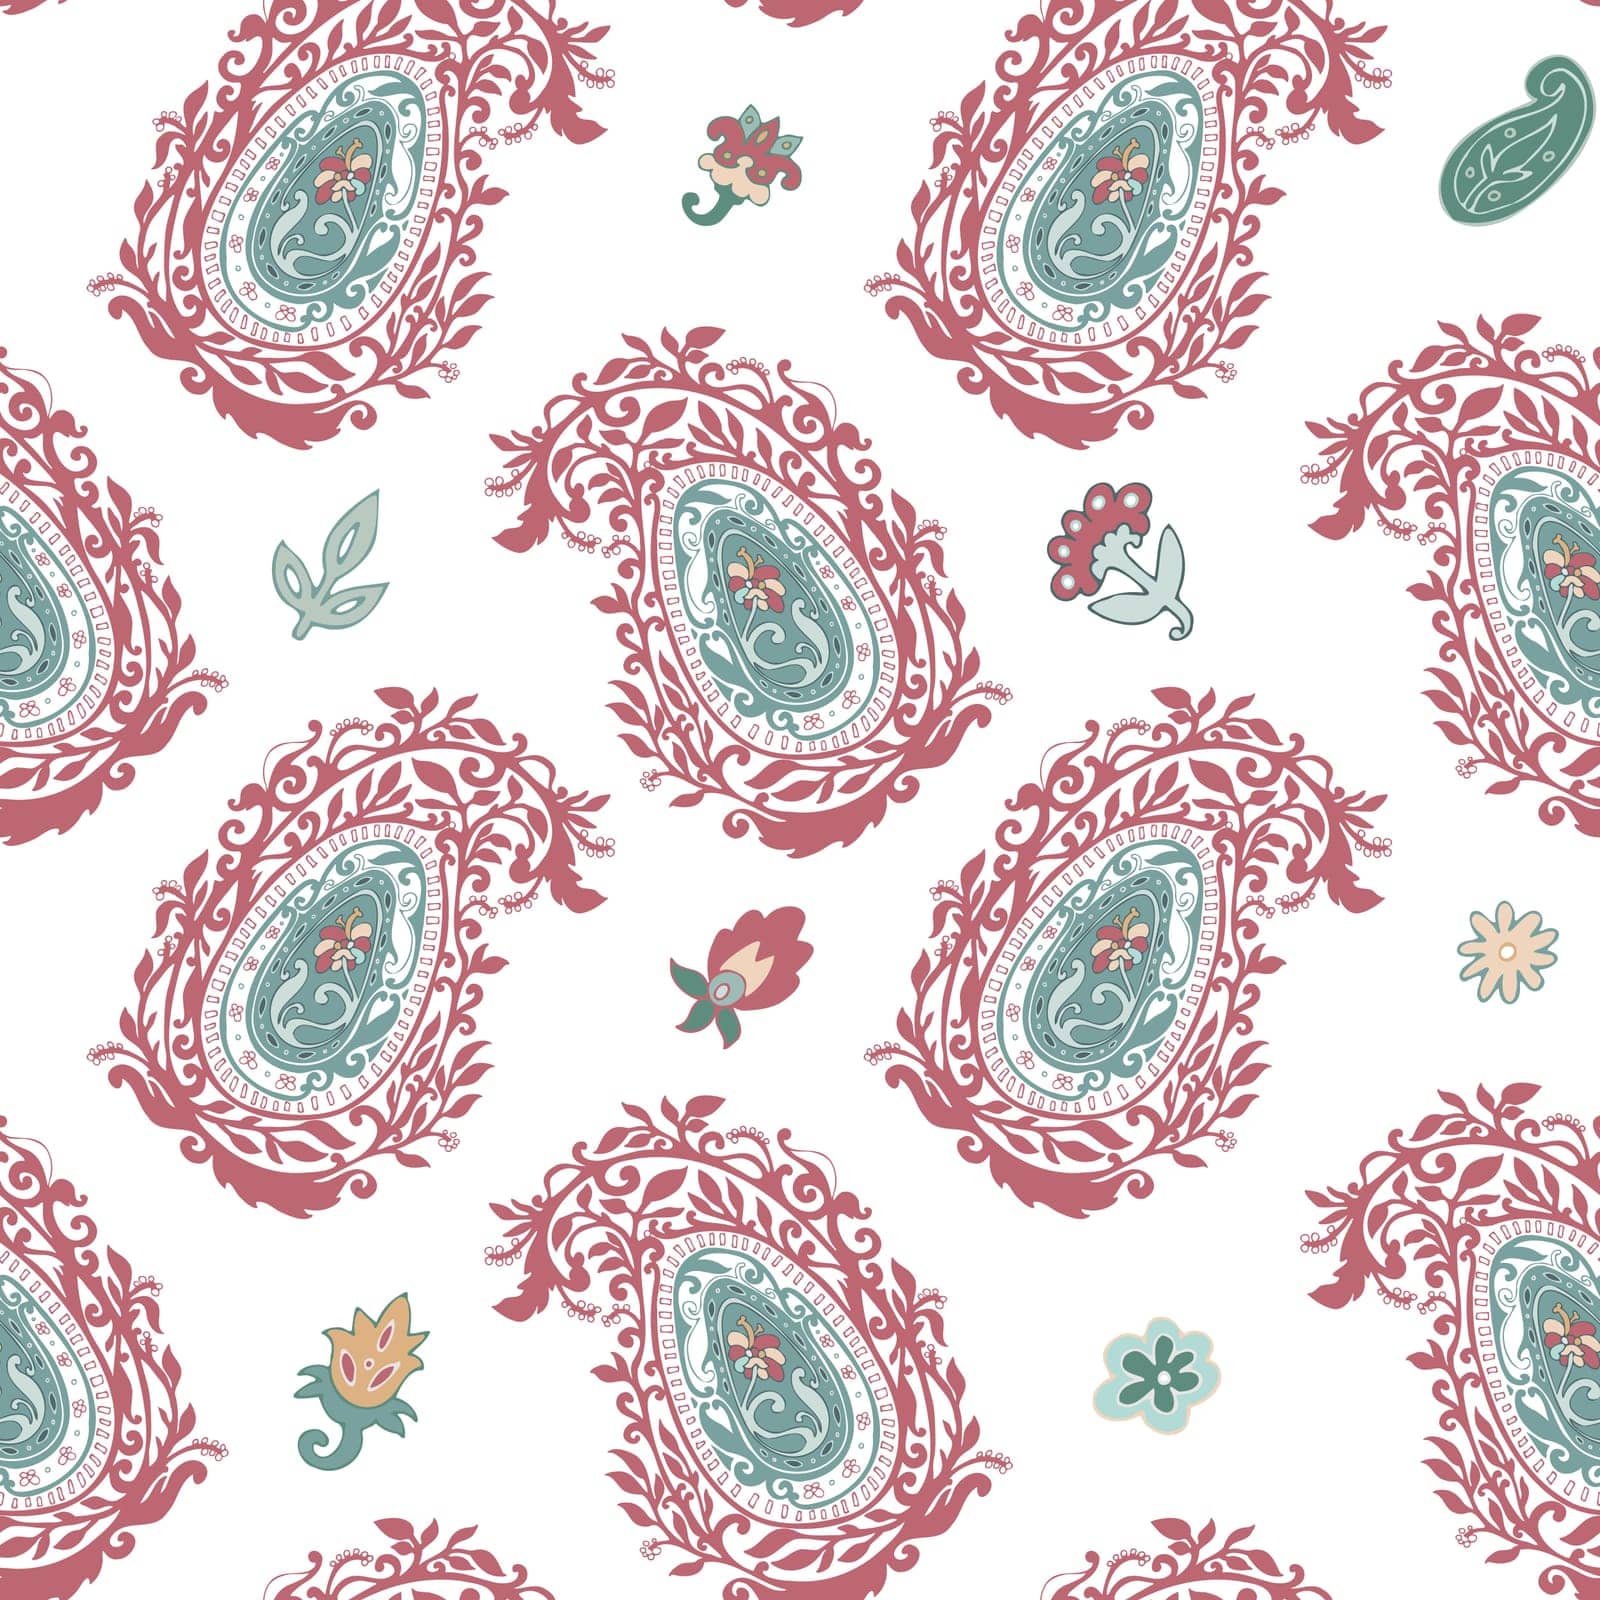 Foliage and blooming flowers, spring and summer seasonal blossom. Trendy romantic repeatable wallpaper or background with leaves. Print for textile or wrapping. Seamless pattern, vector in flat style